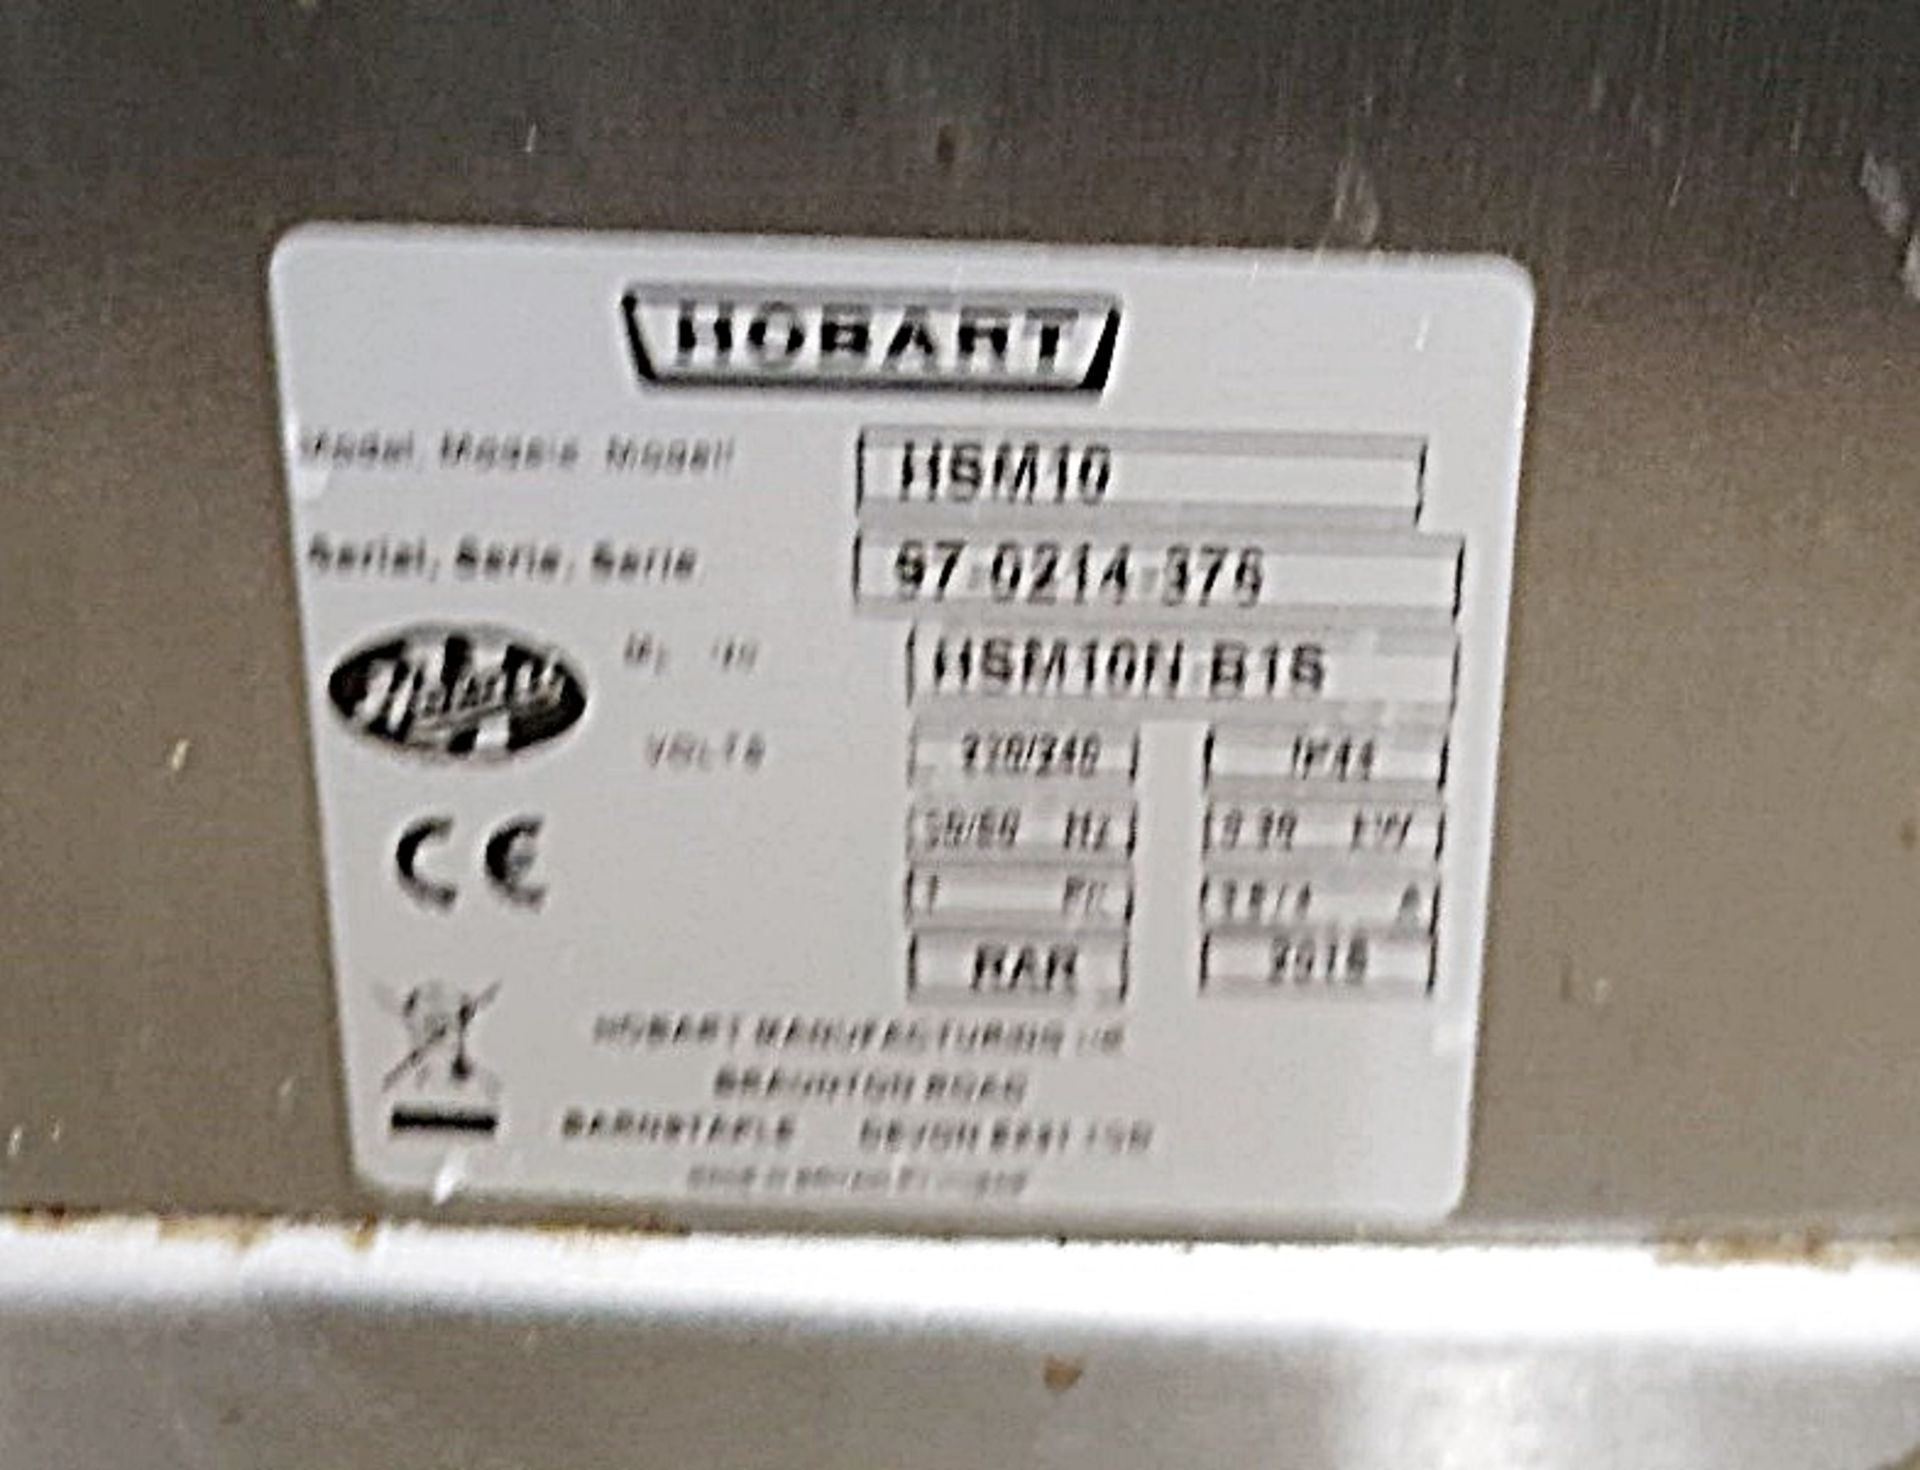 1 x Hobart HSM10-B1S 10 Litre Bench Planetary Mixer - H57.5 x W36.5 x D41.5 cms - Ref PA218 - - Image 2 of 4